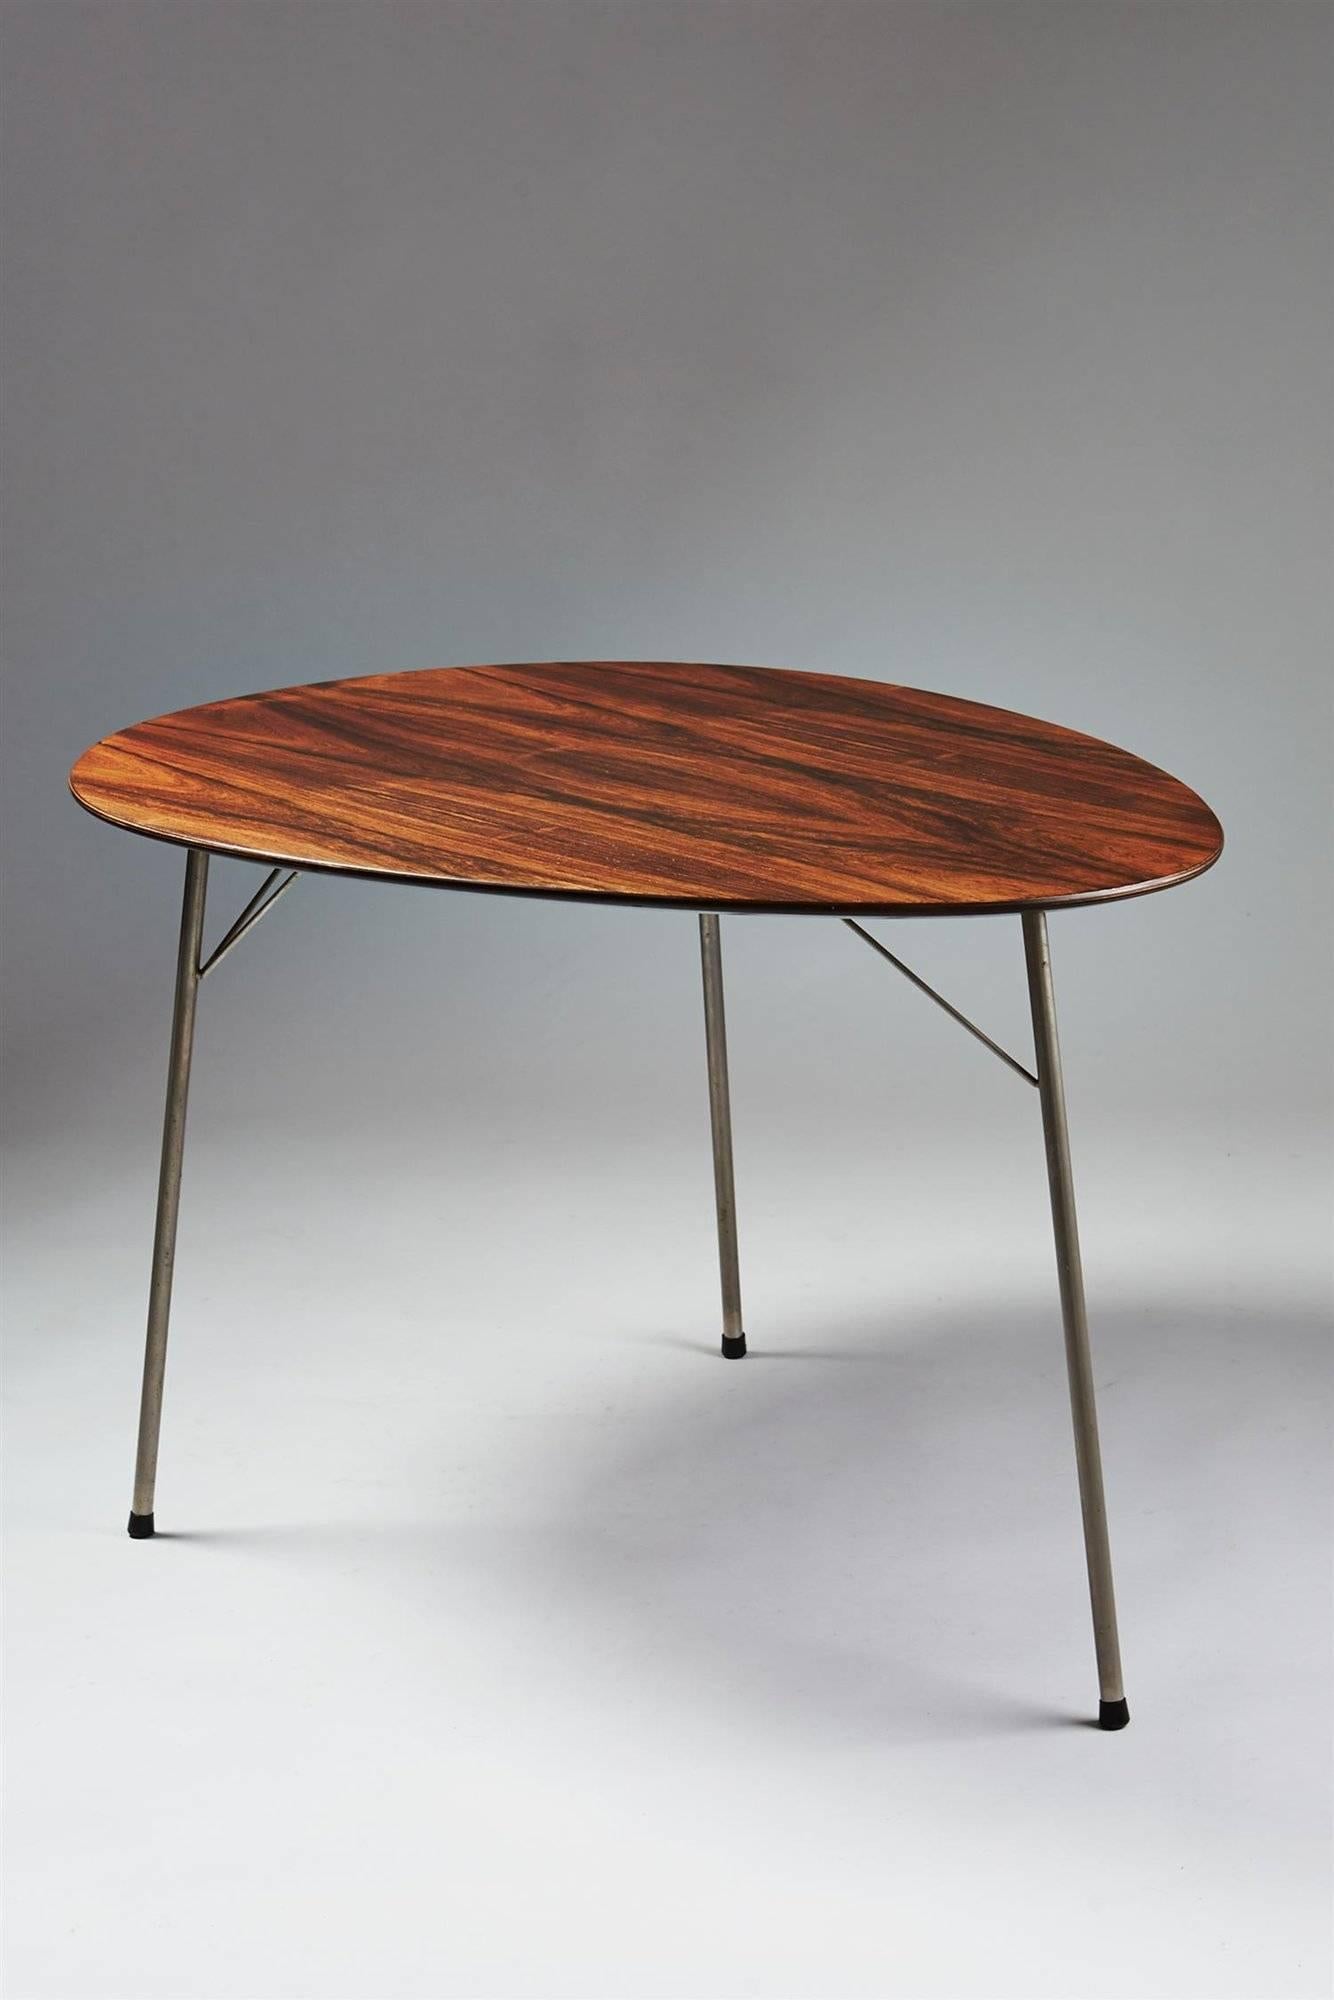 Dining table and four chairs, designed by Arne Jacobsen for Fritz Hansen, Denmark, 1965.
Rosewood and stainless steel.

Dimensions of the table:
H 69 cm/ 27 1/4